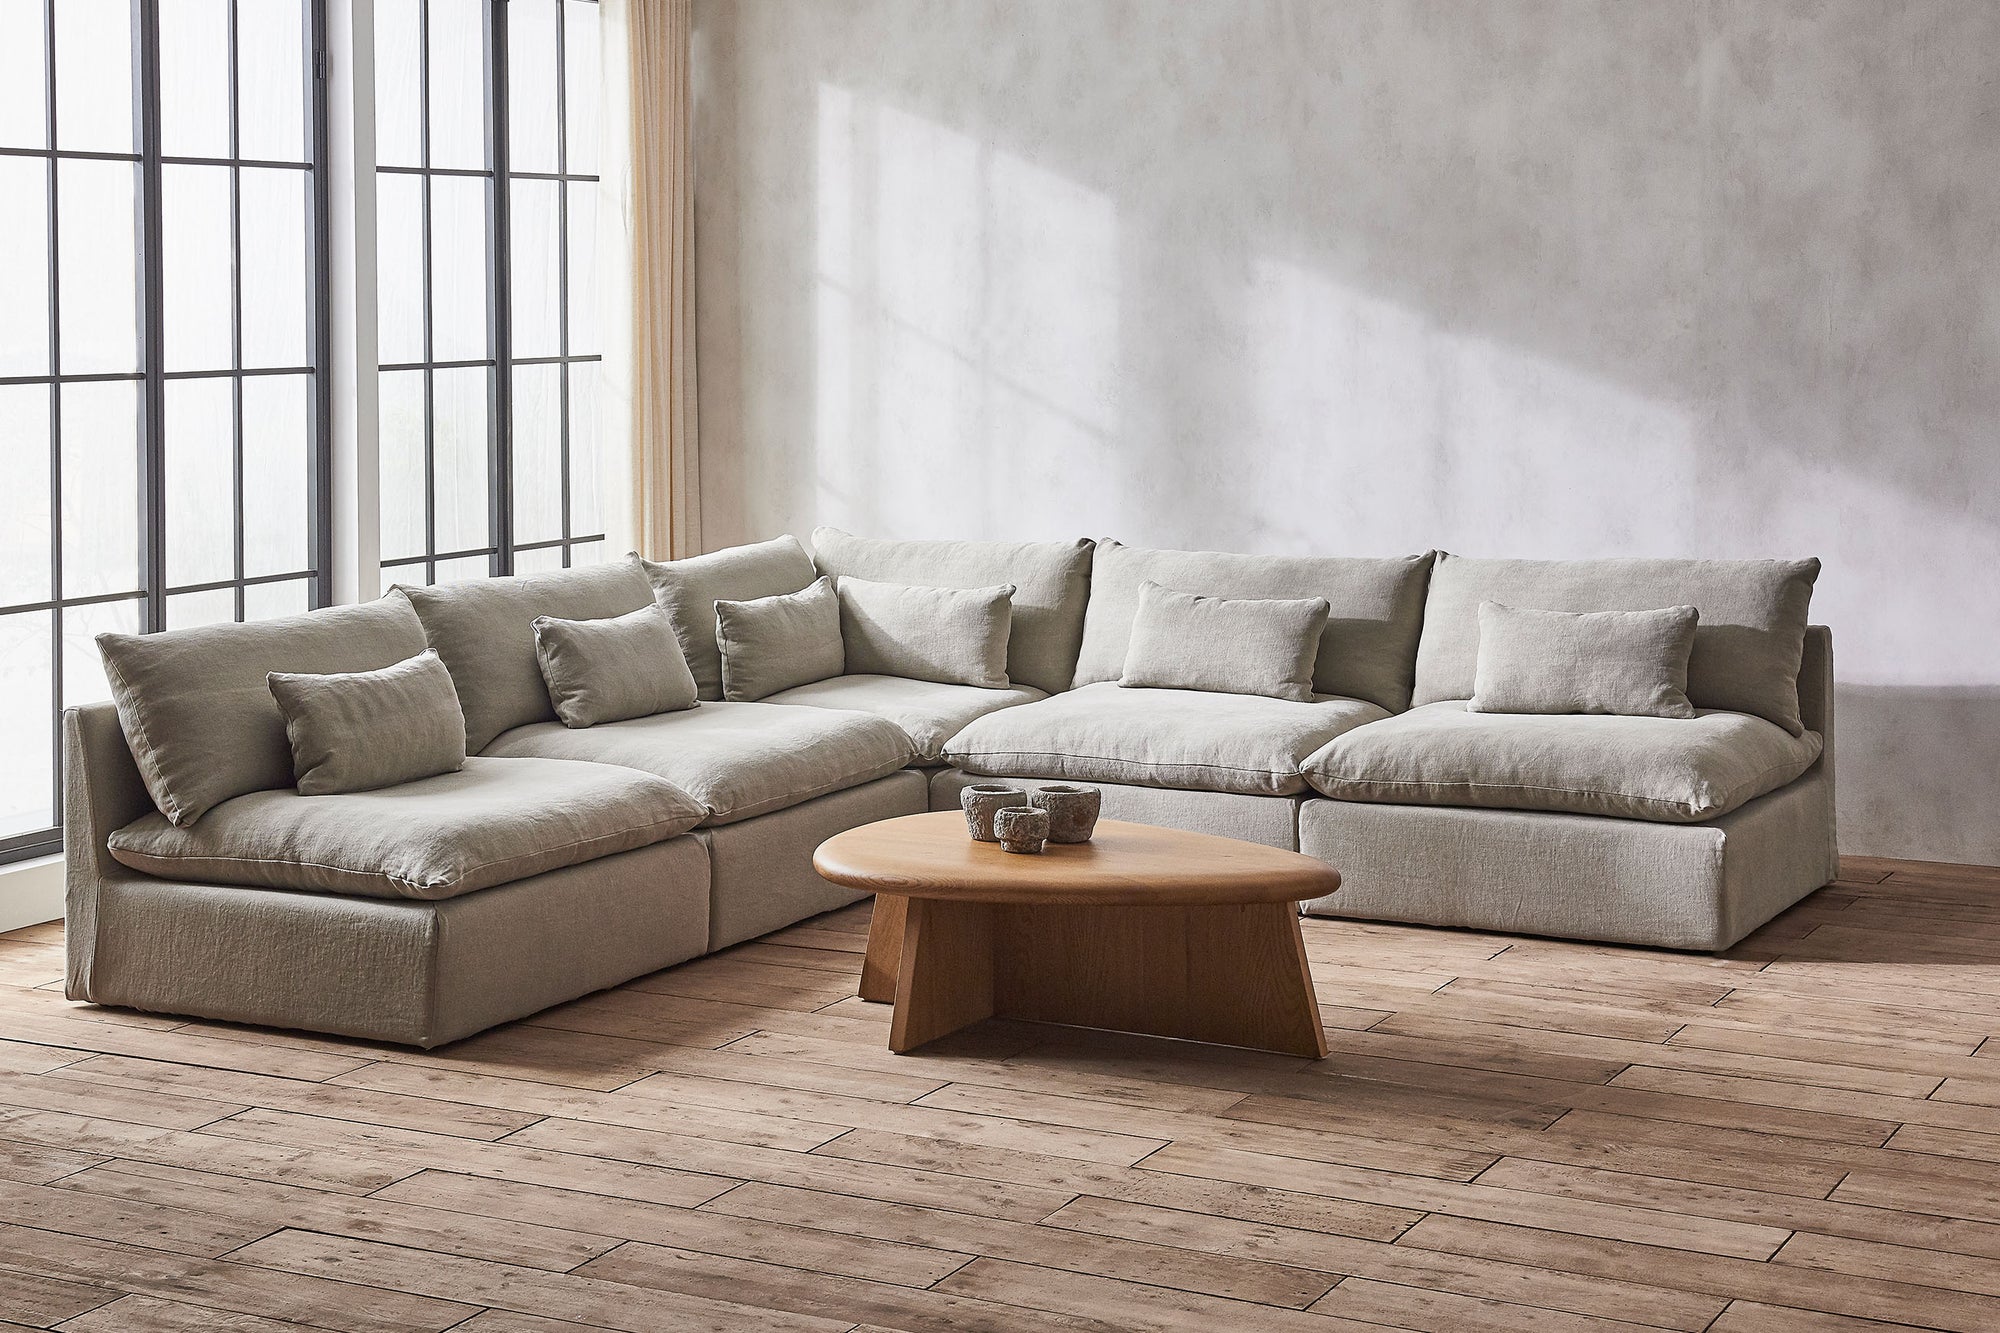 Aria Corner Sectional Sofa in Jasmine Rice, a light warm greige Medium Weight Linen, placed in a sunlit room with the Amina Coffee Table